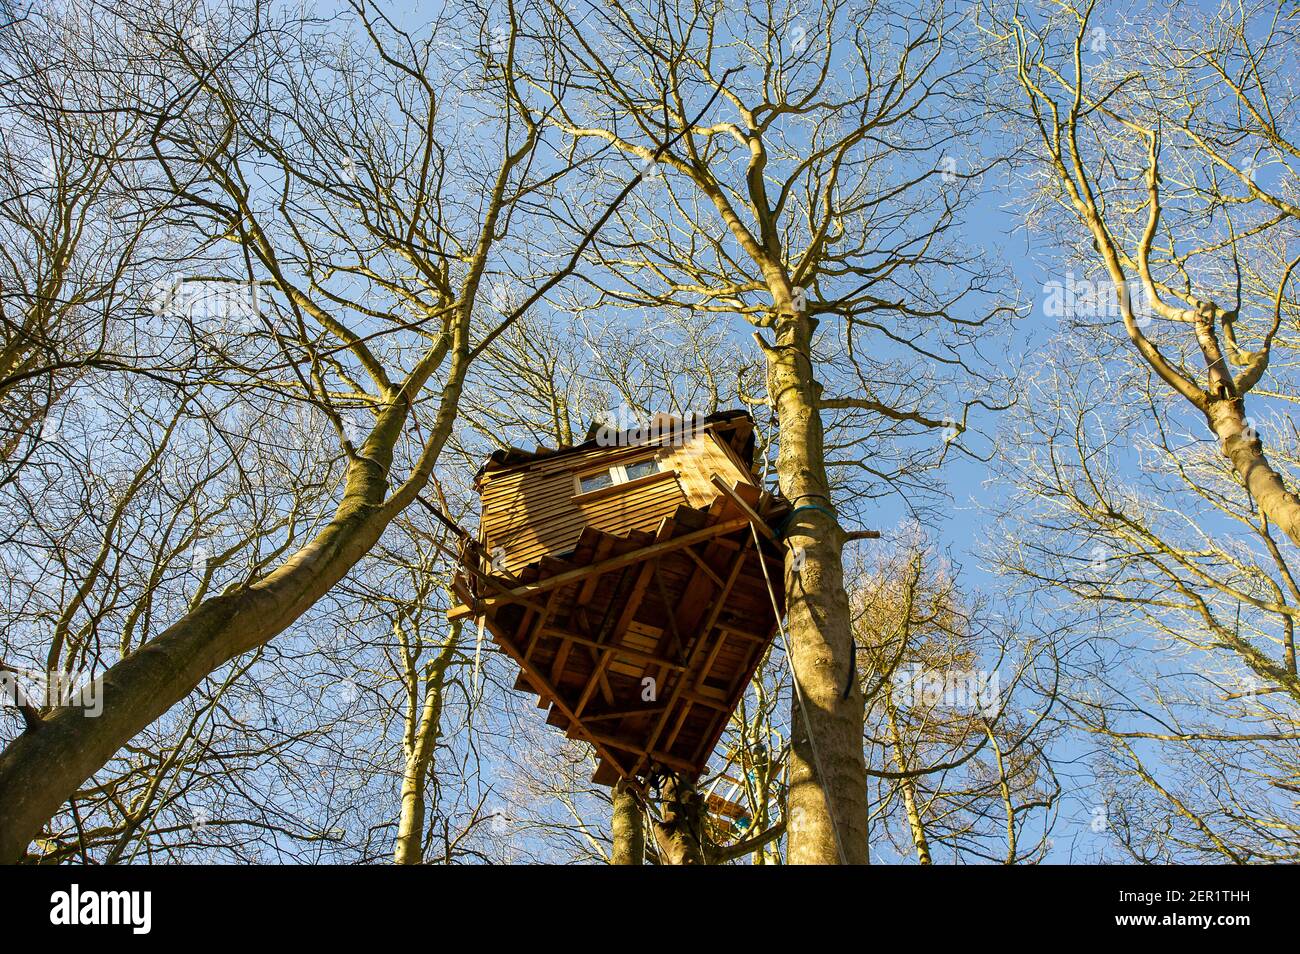 Aylesbury, Buckinghamshire, UK. 26th February, 2021. A tree house at the  camp. A protester tree house. Following the partial eviction of HS2 anti  HS2 protesters from Poor's Piece in Steeple Claydon this